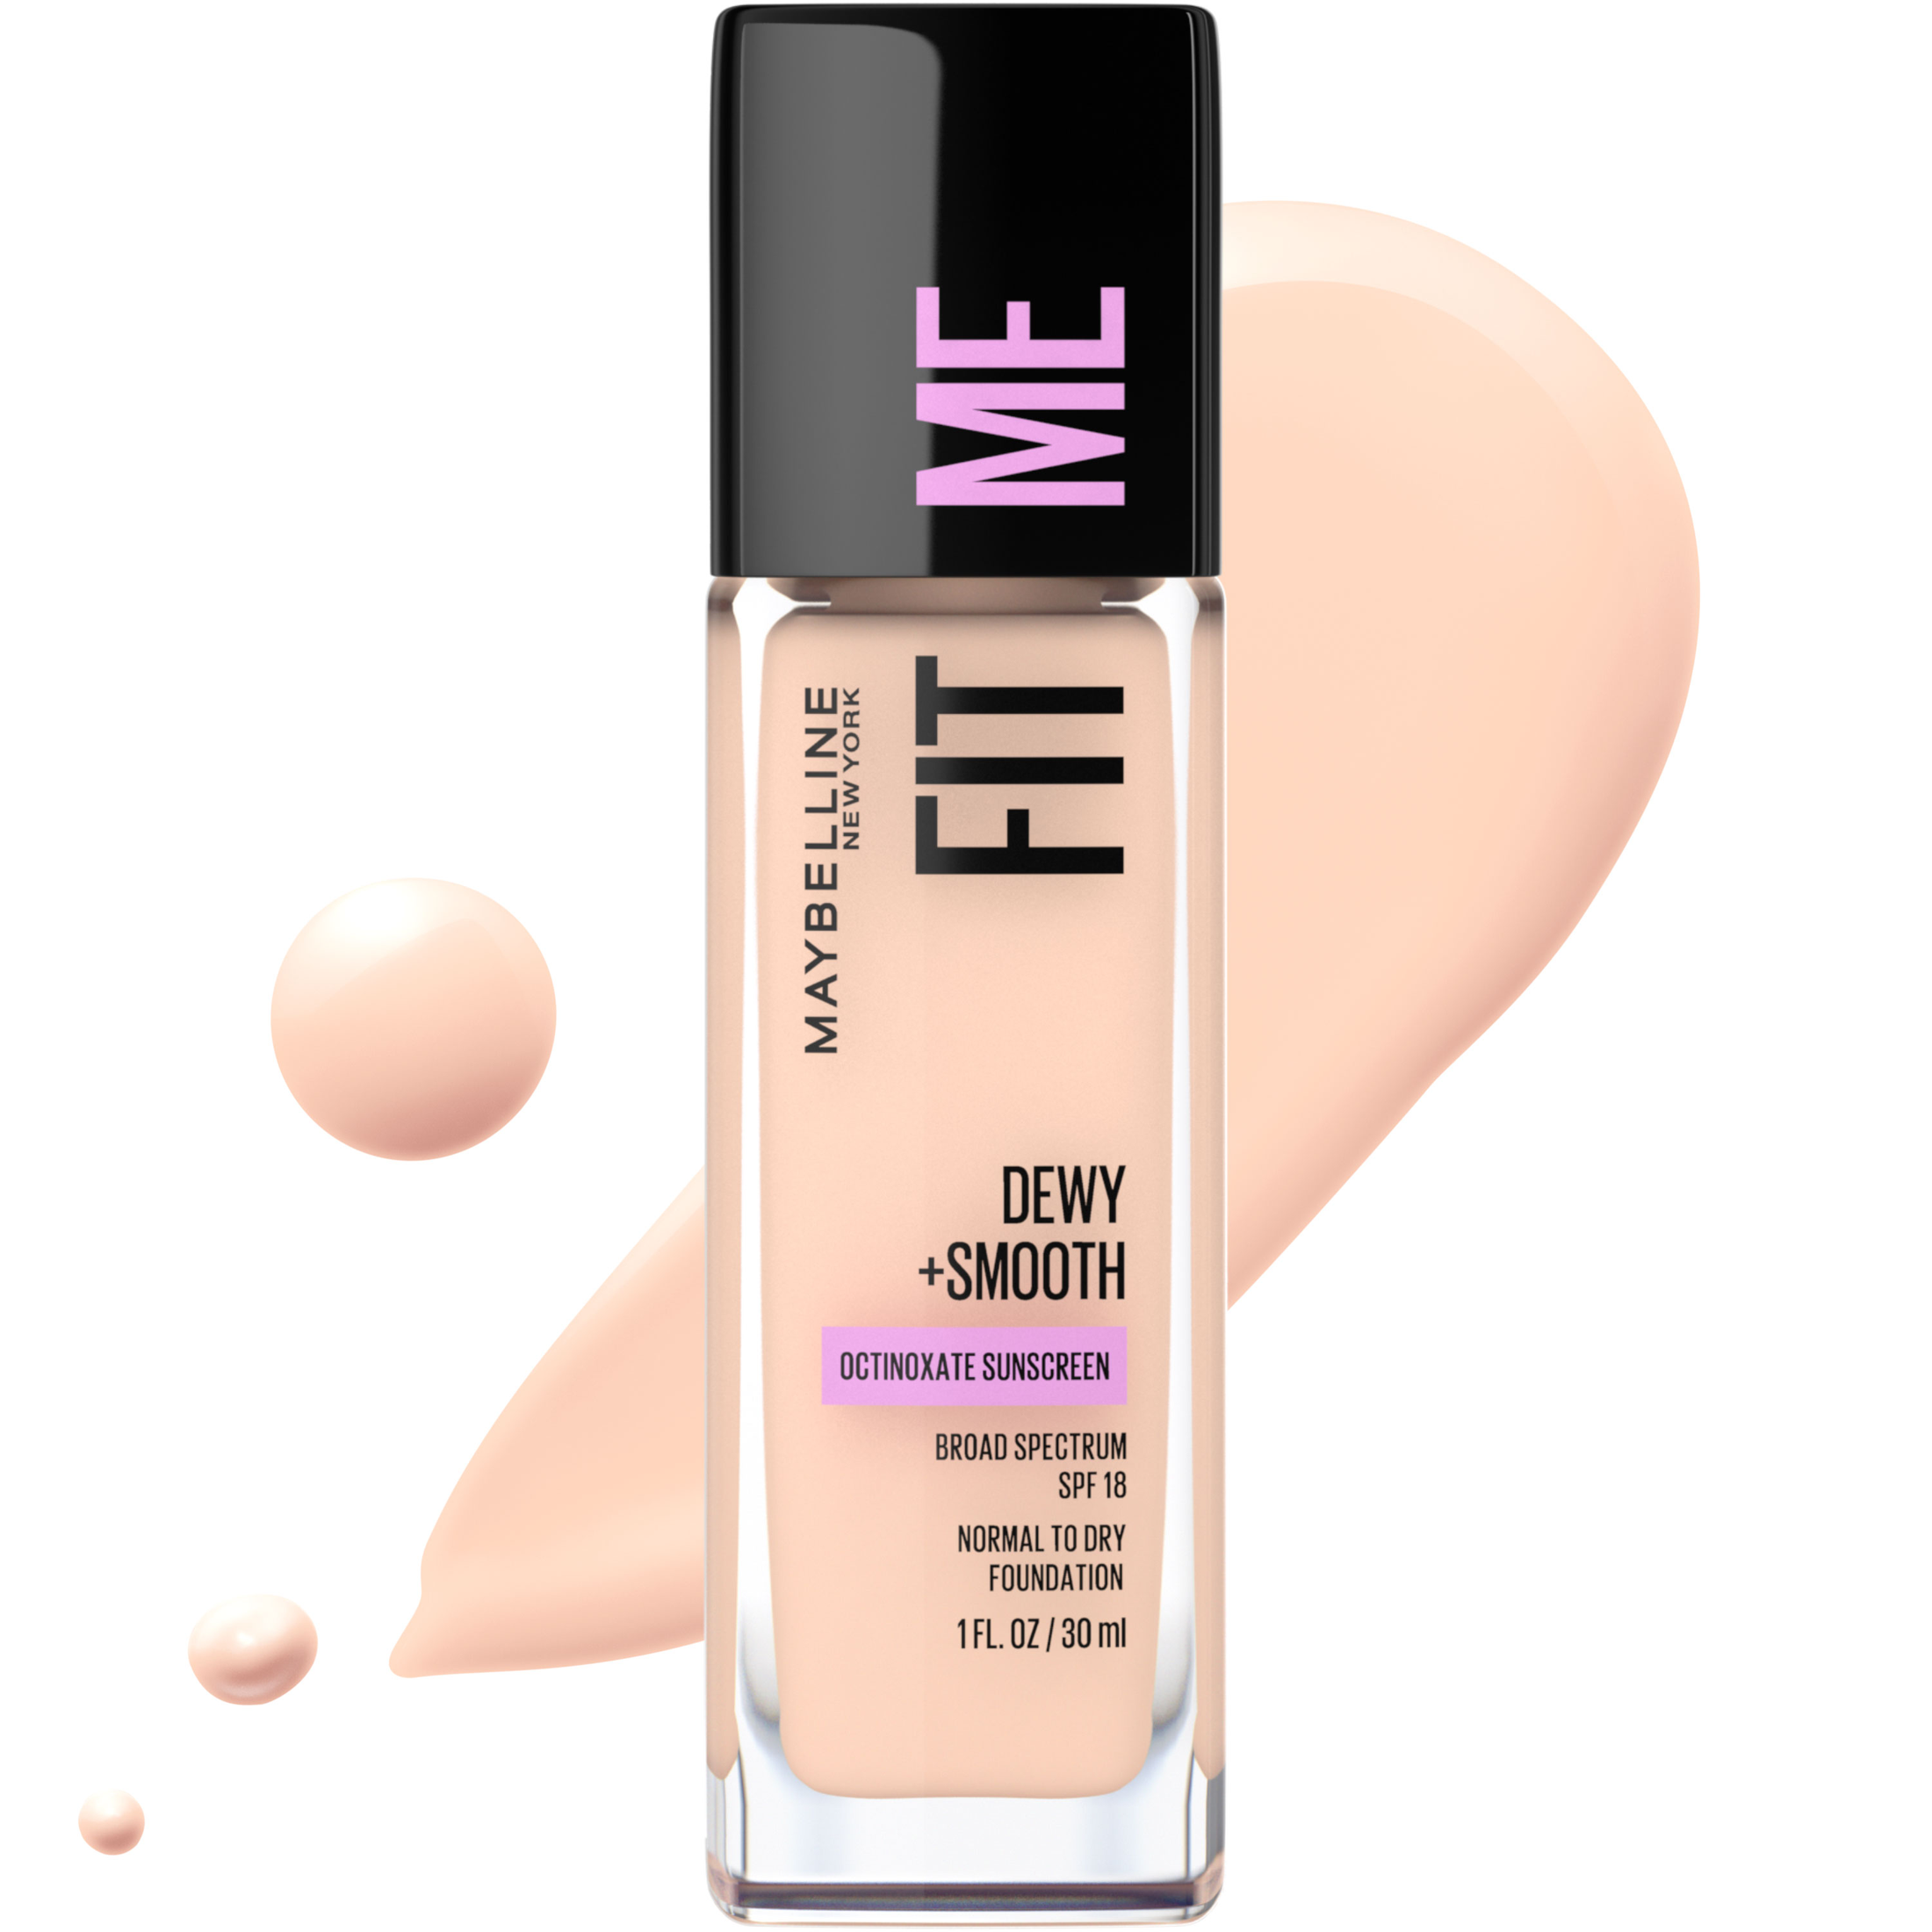 Maybelline Fit Me Dewy and Smooth Liquid Foundation, SPF 18, 105 Fair Ivory, 1 fl oz - image 1 of 9